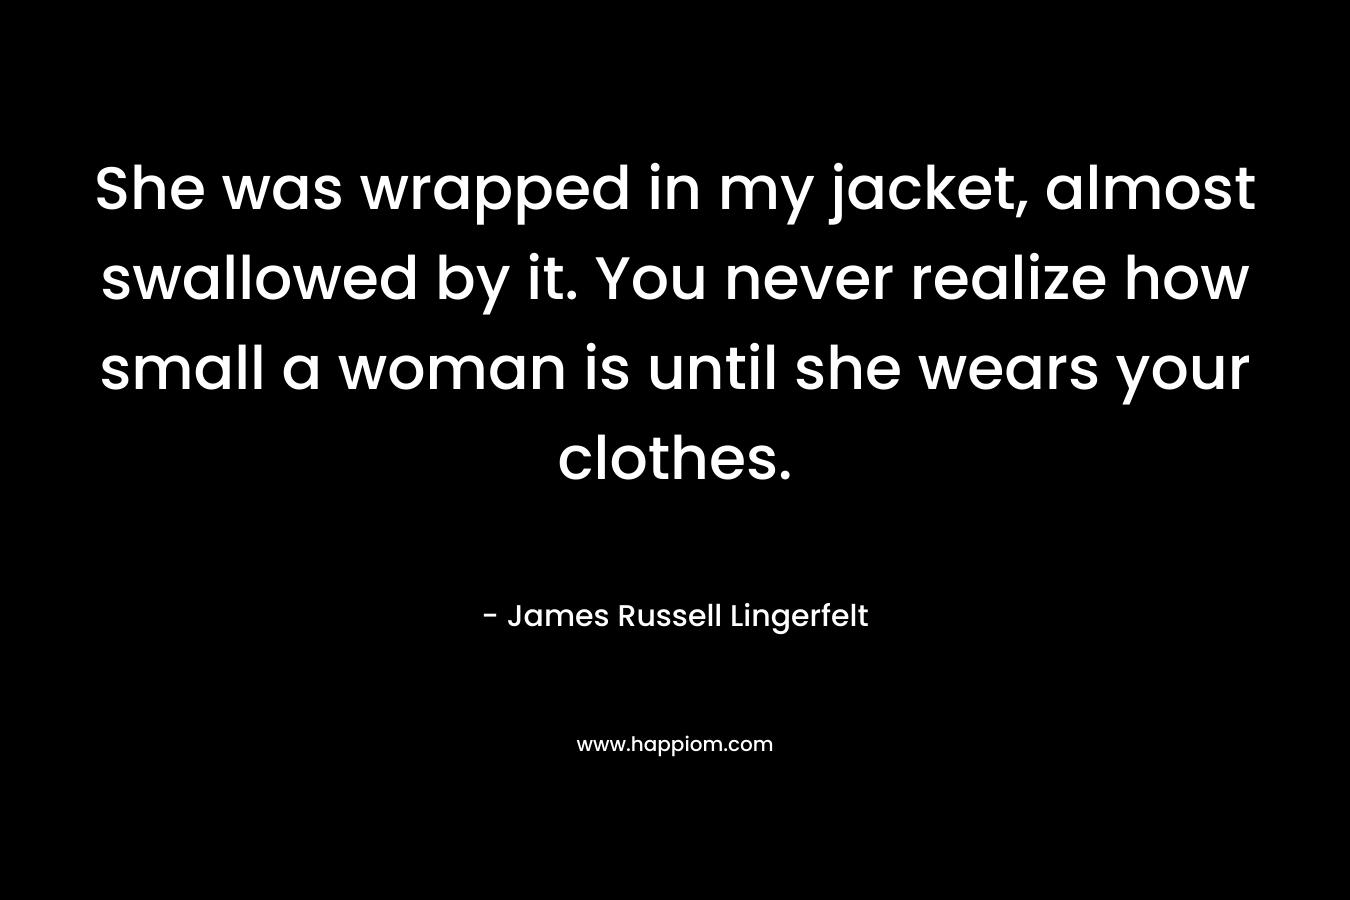 She was wrapped in my jacket, almost swallowed by it. You never realize how small a woman is until she wears your clothes.